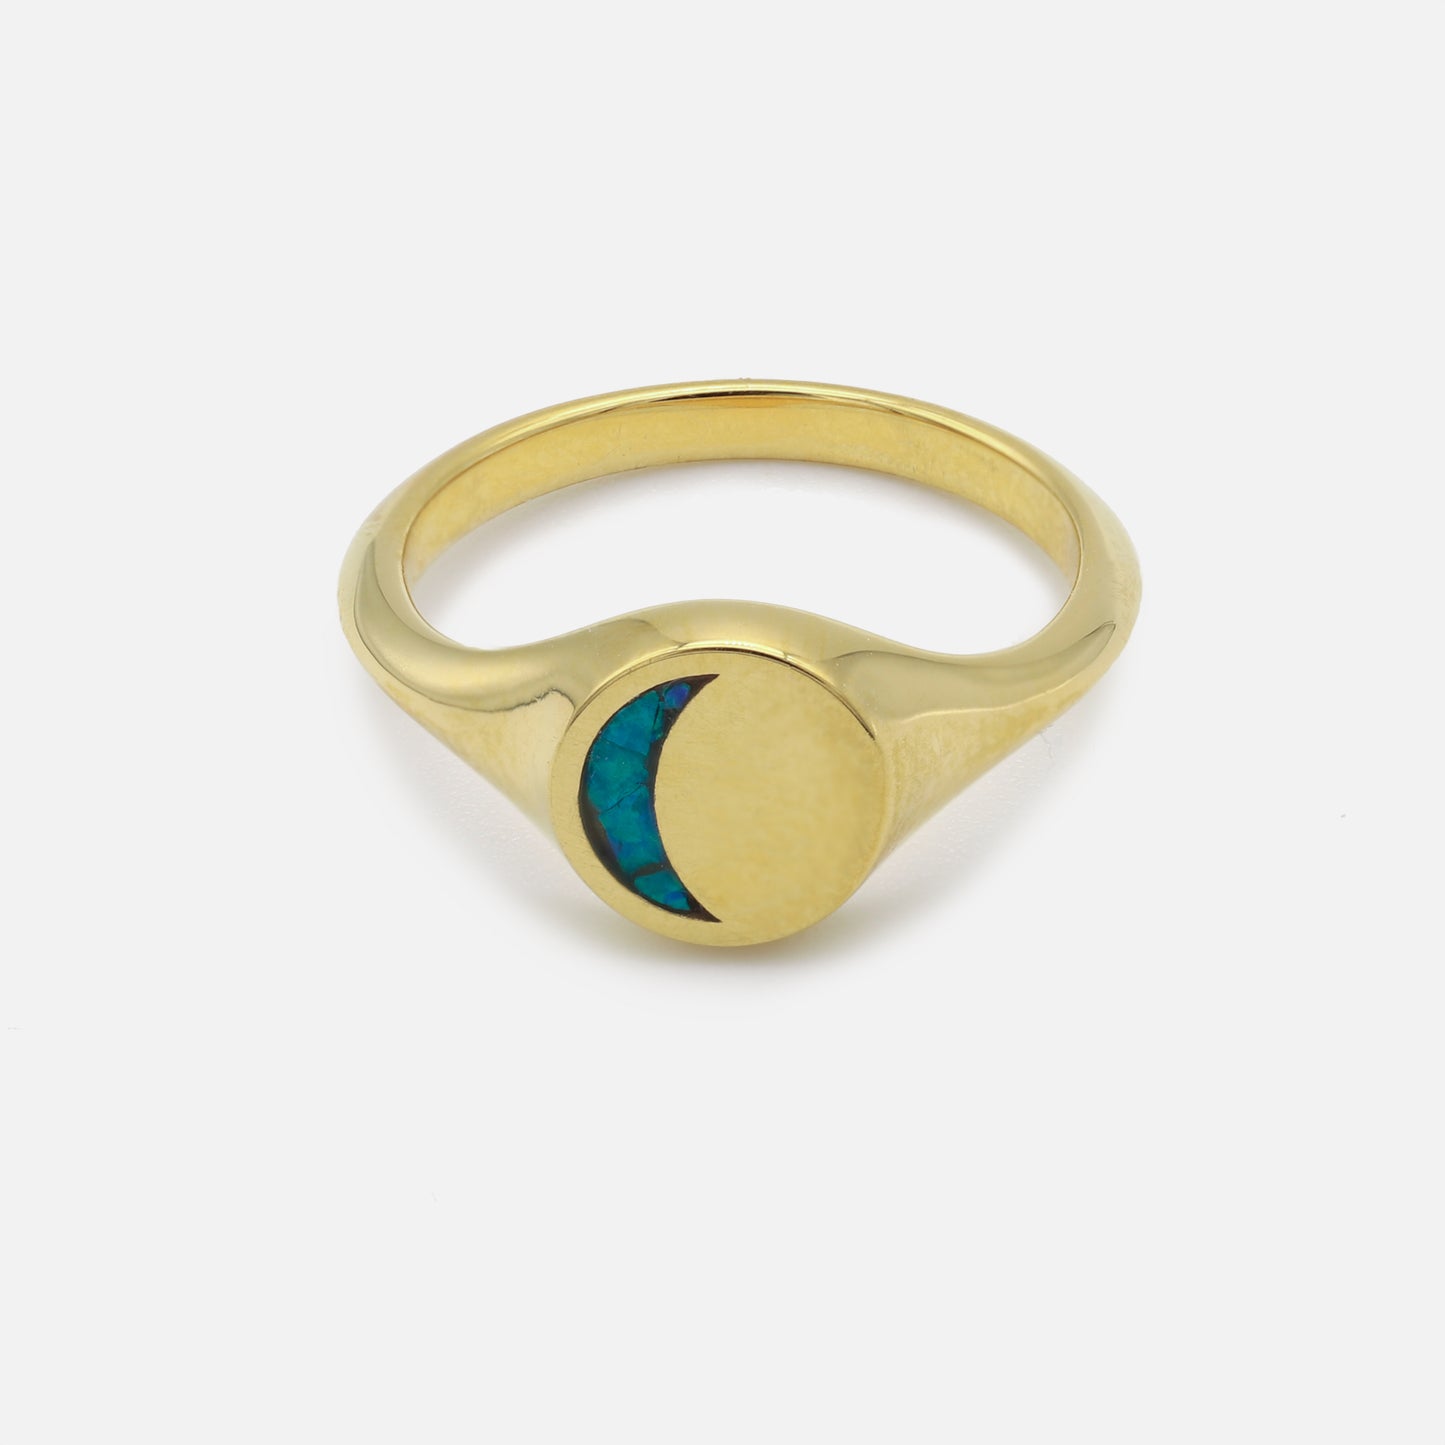 Crescent Moon Signet Ring in Gold Plated Brass with Opal Mosaic Inlay